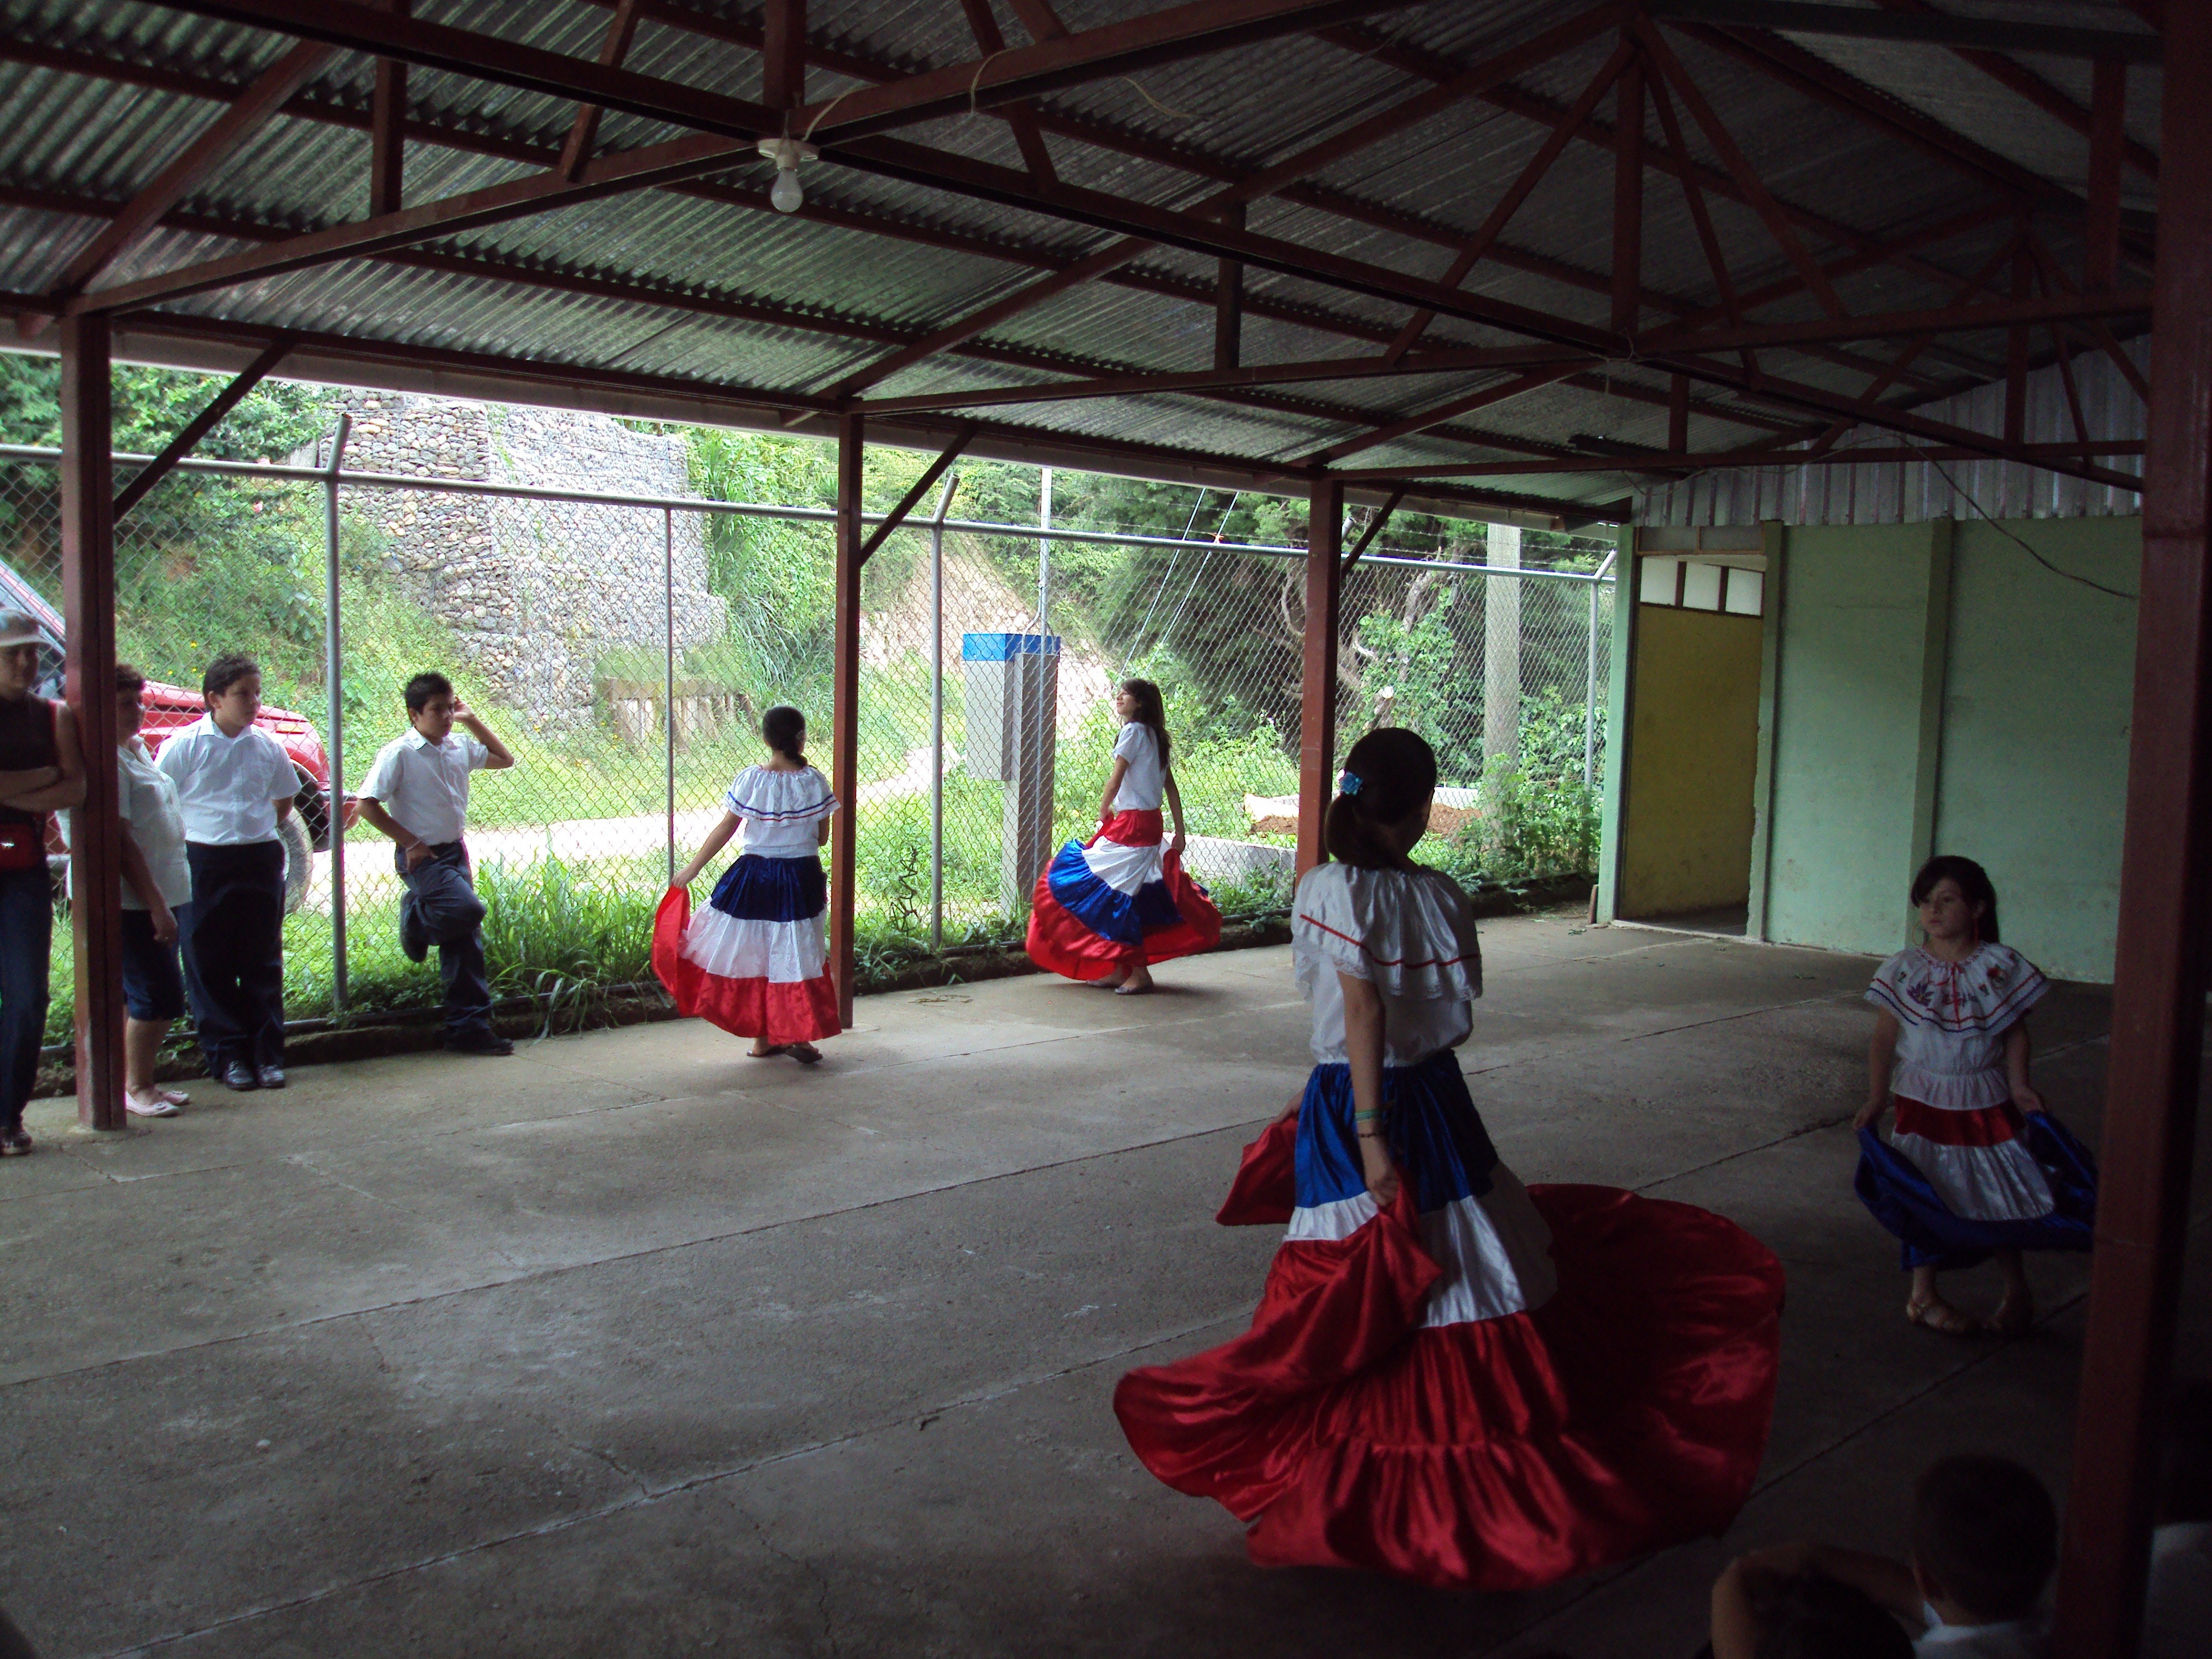 Students doing "baile tipico" or traditional folk dance.